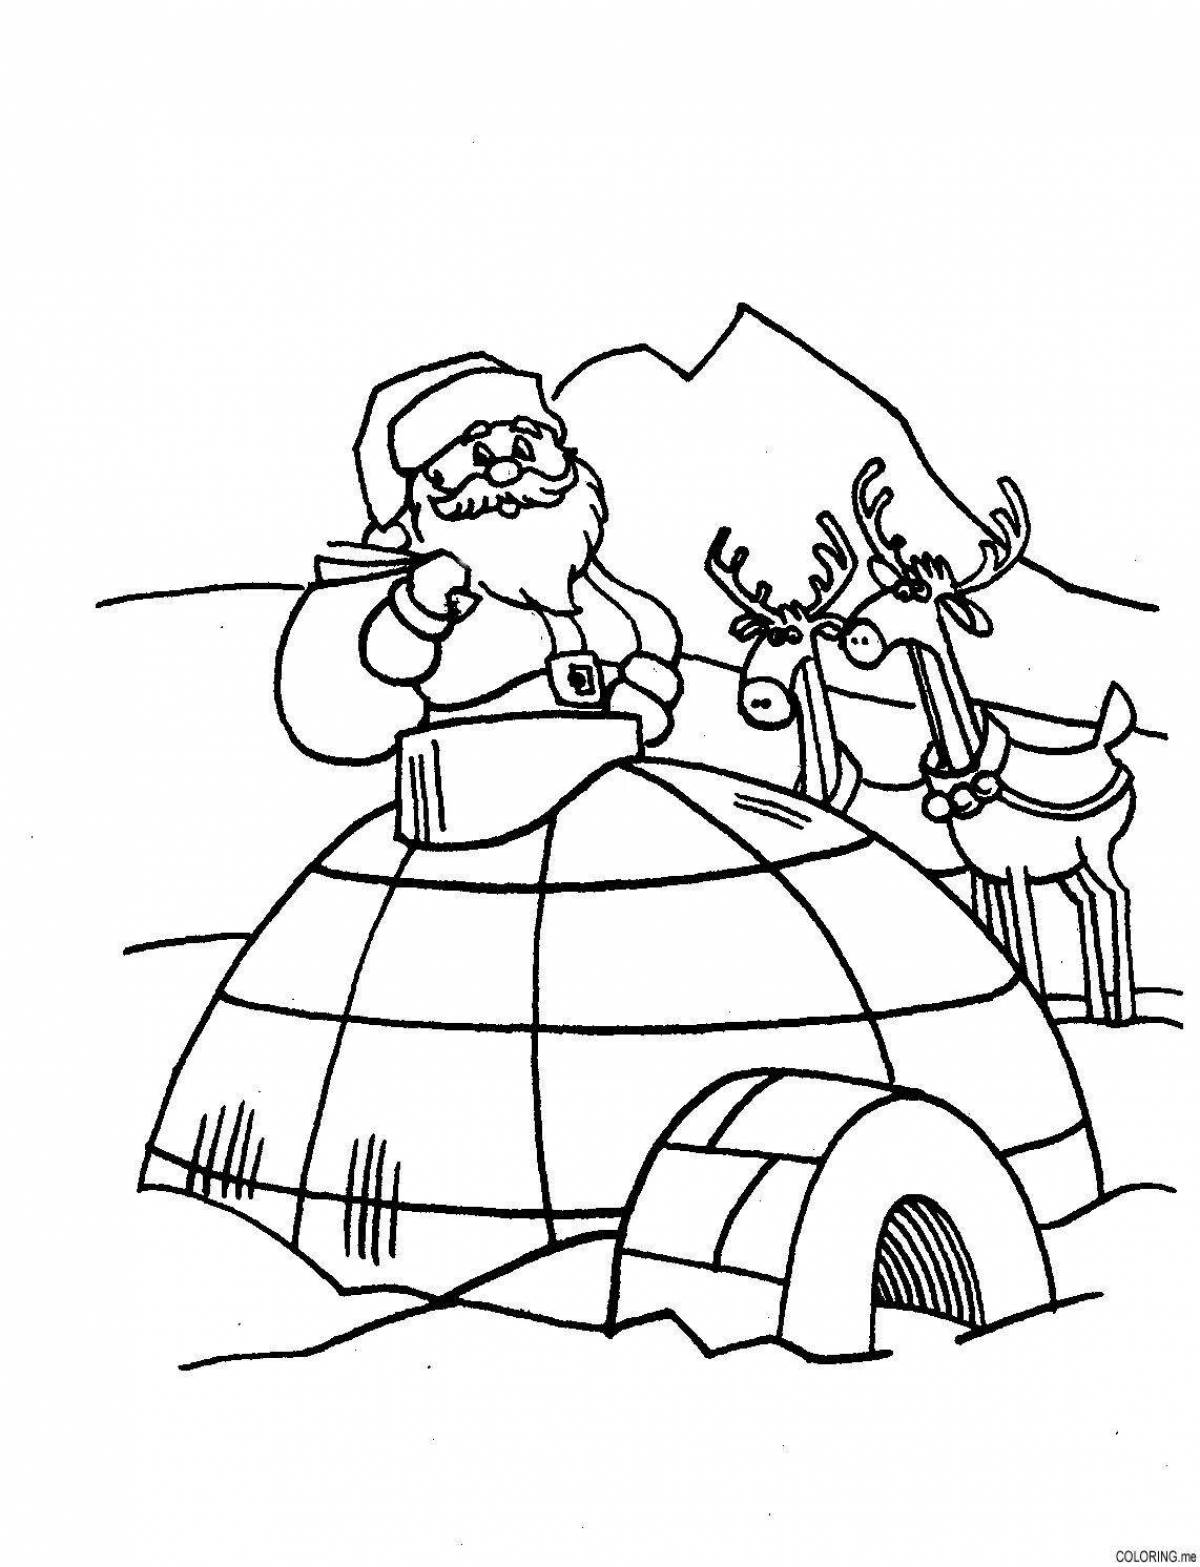 Animated baby igloo coloring page